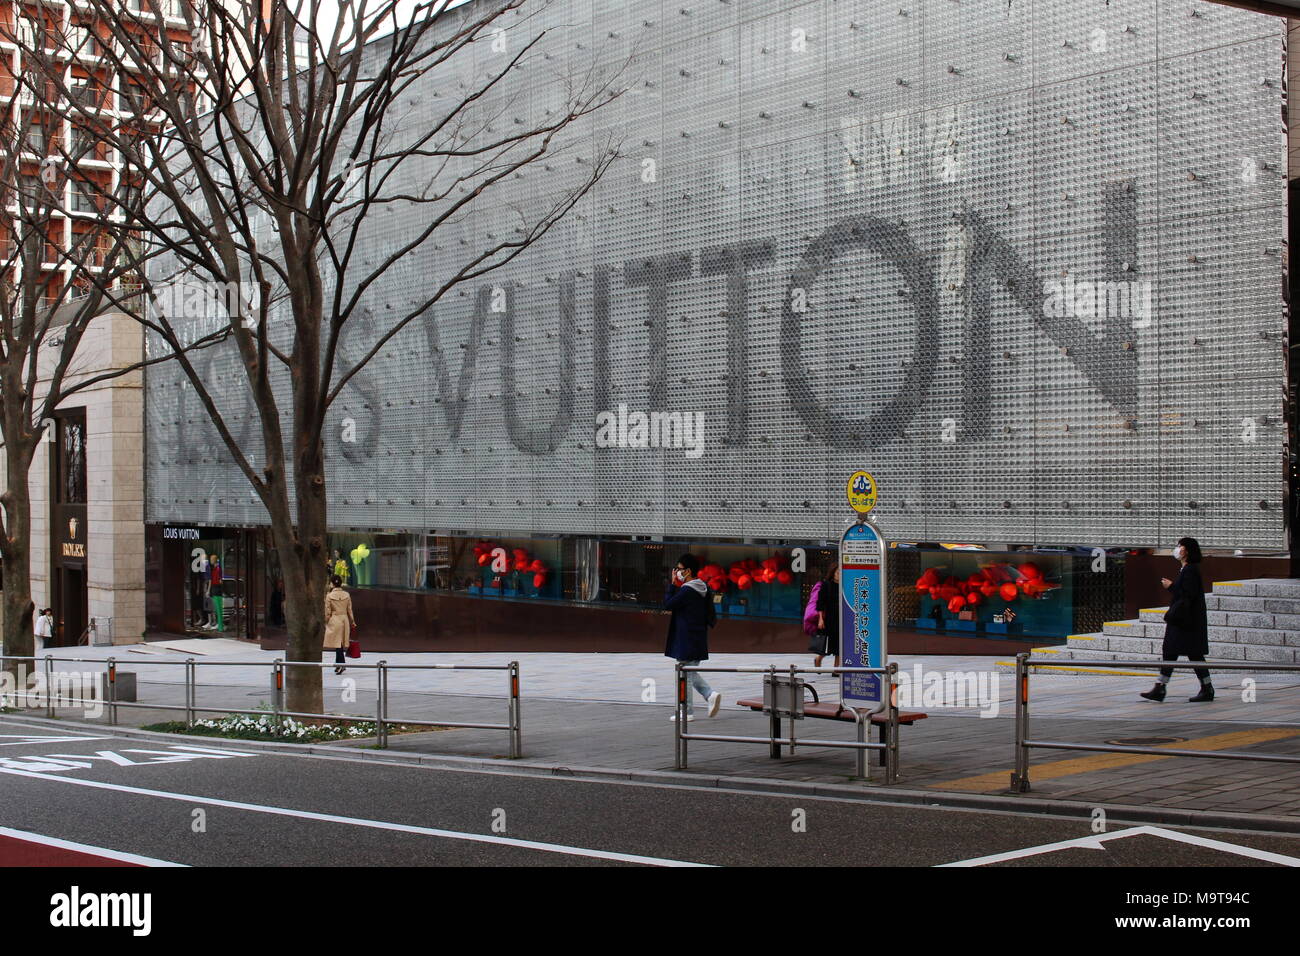 Louis vuitton tokyo store hi-res stock photography and images - Alamy